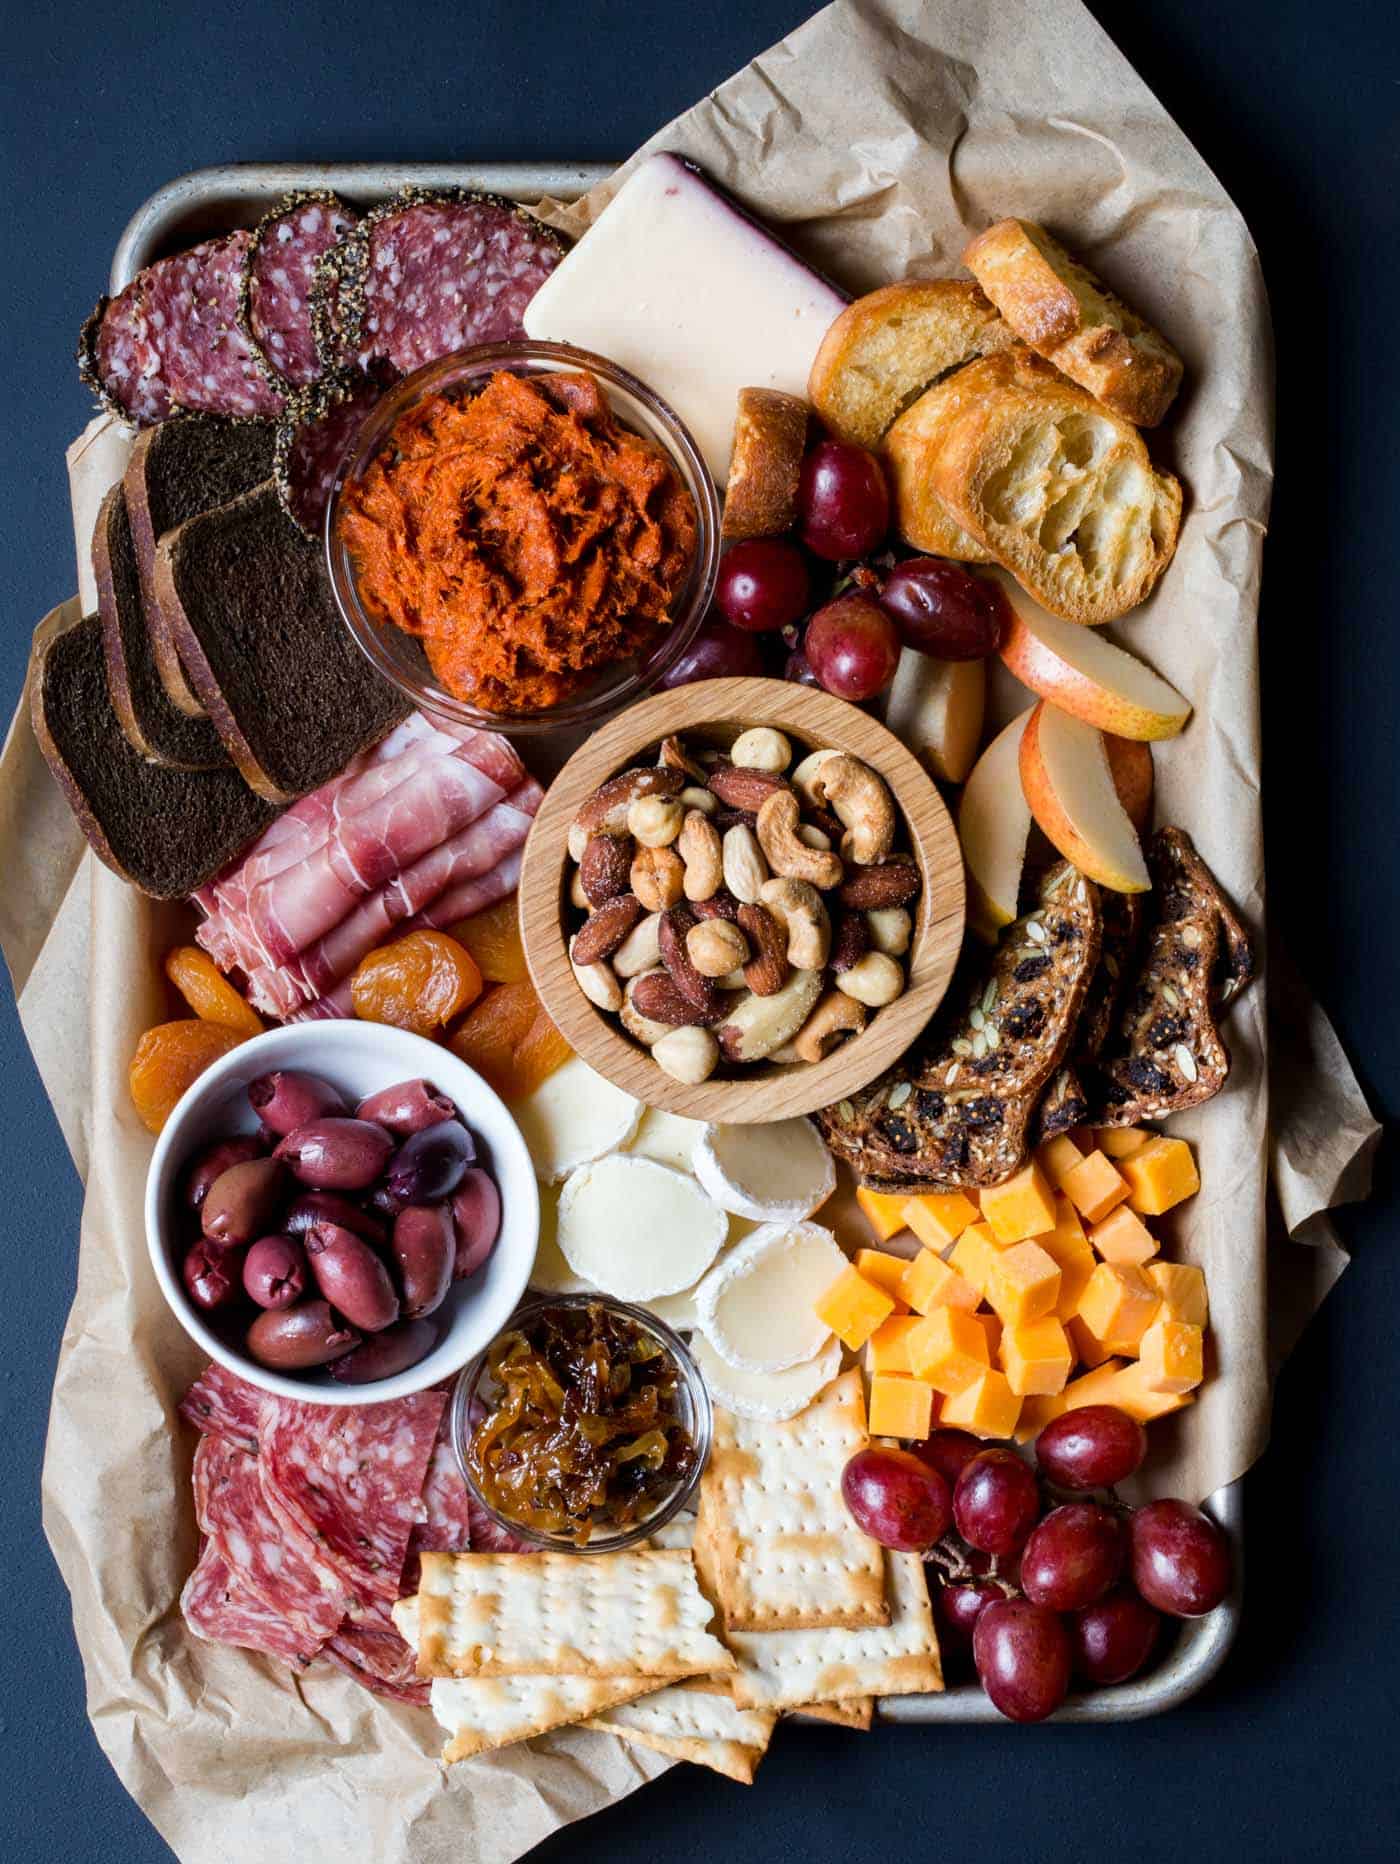 meat and cheese tray with olives, grapes, crostini and apples.